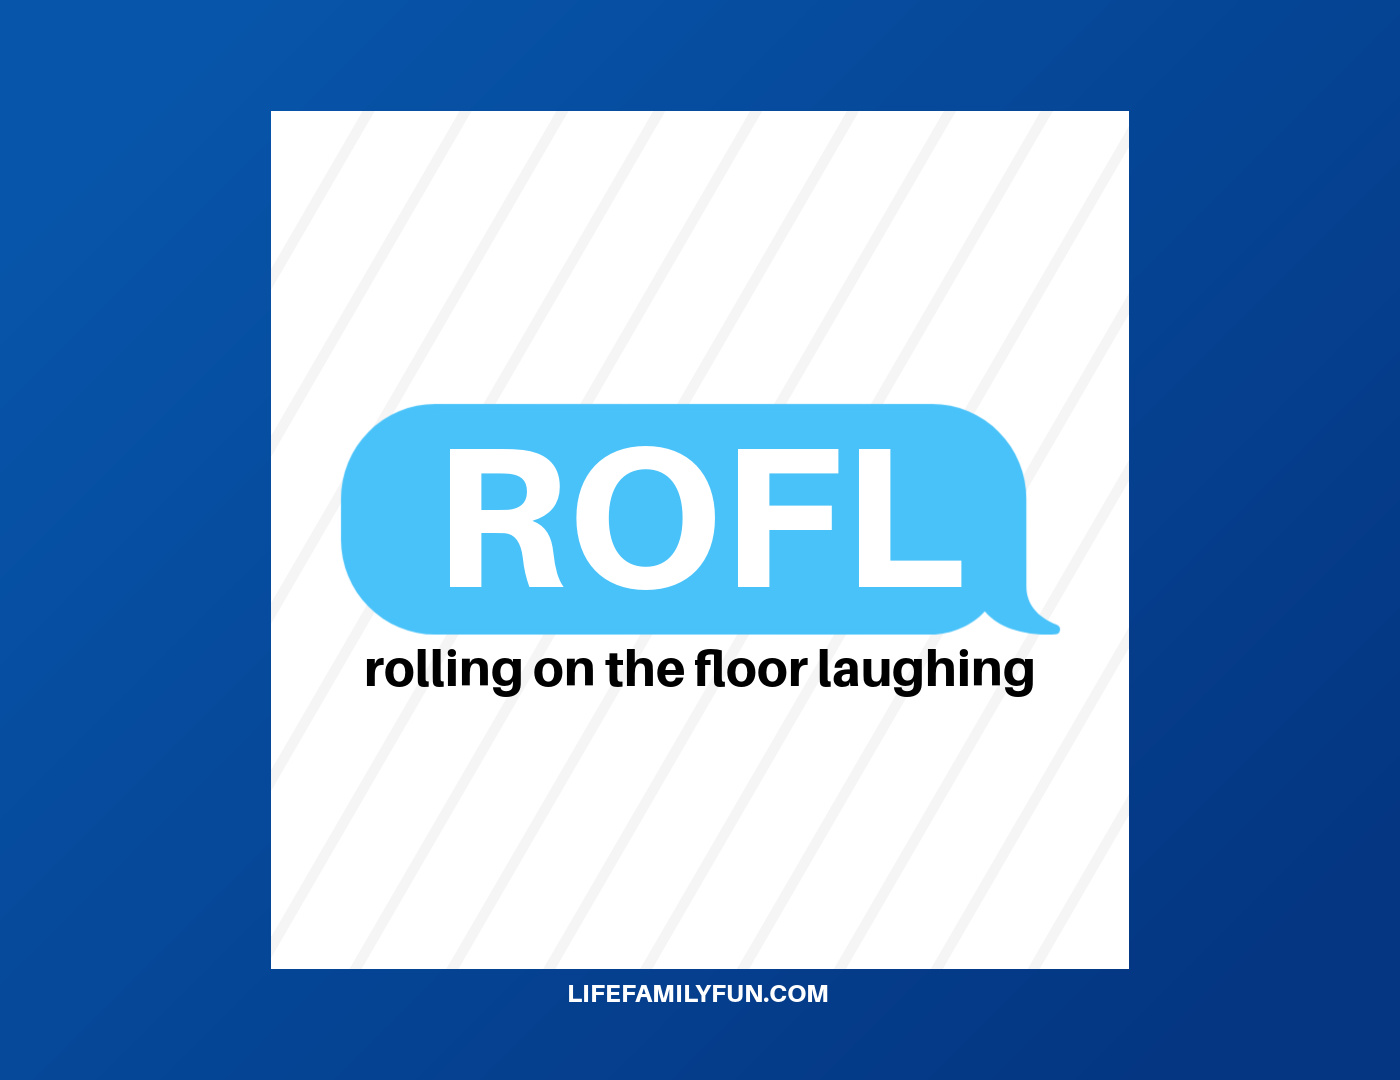 What does ROFL mean?